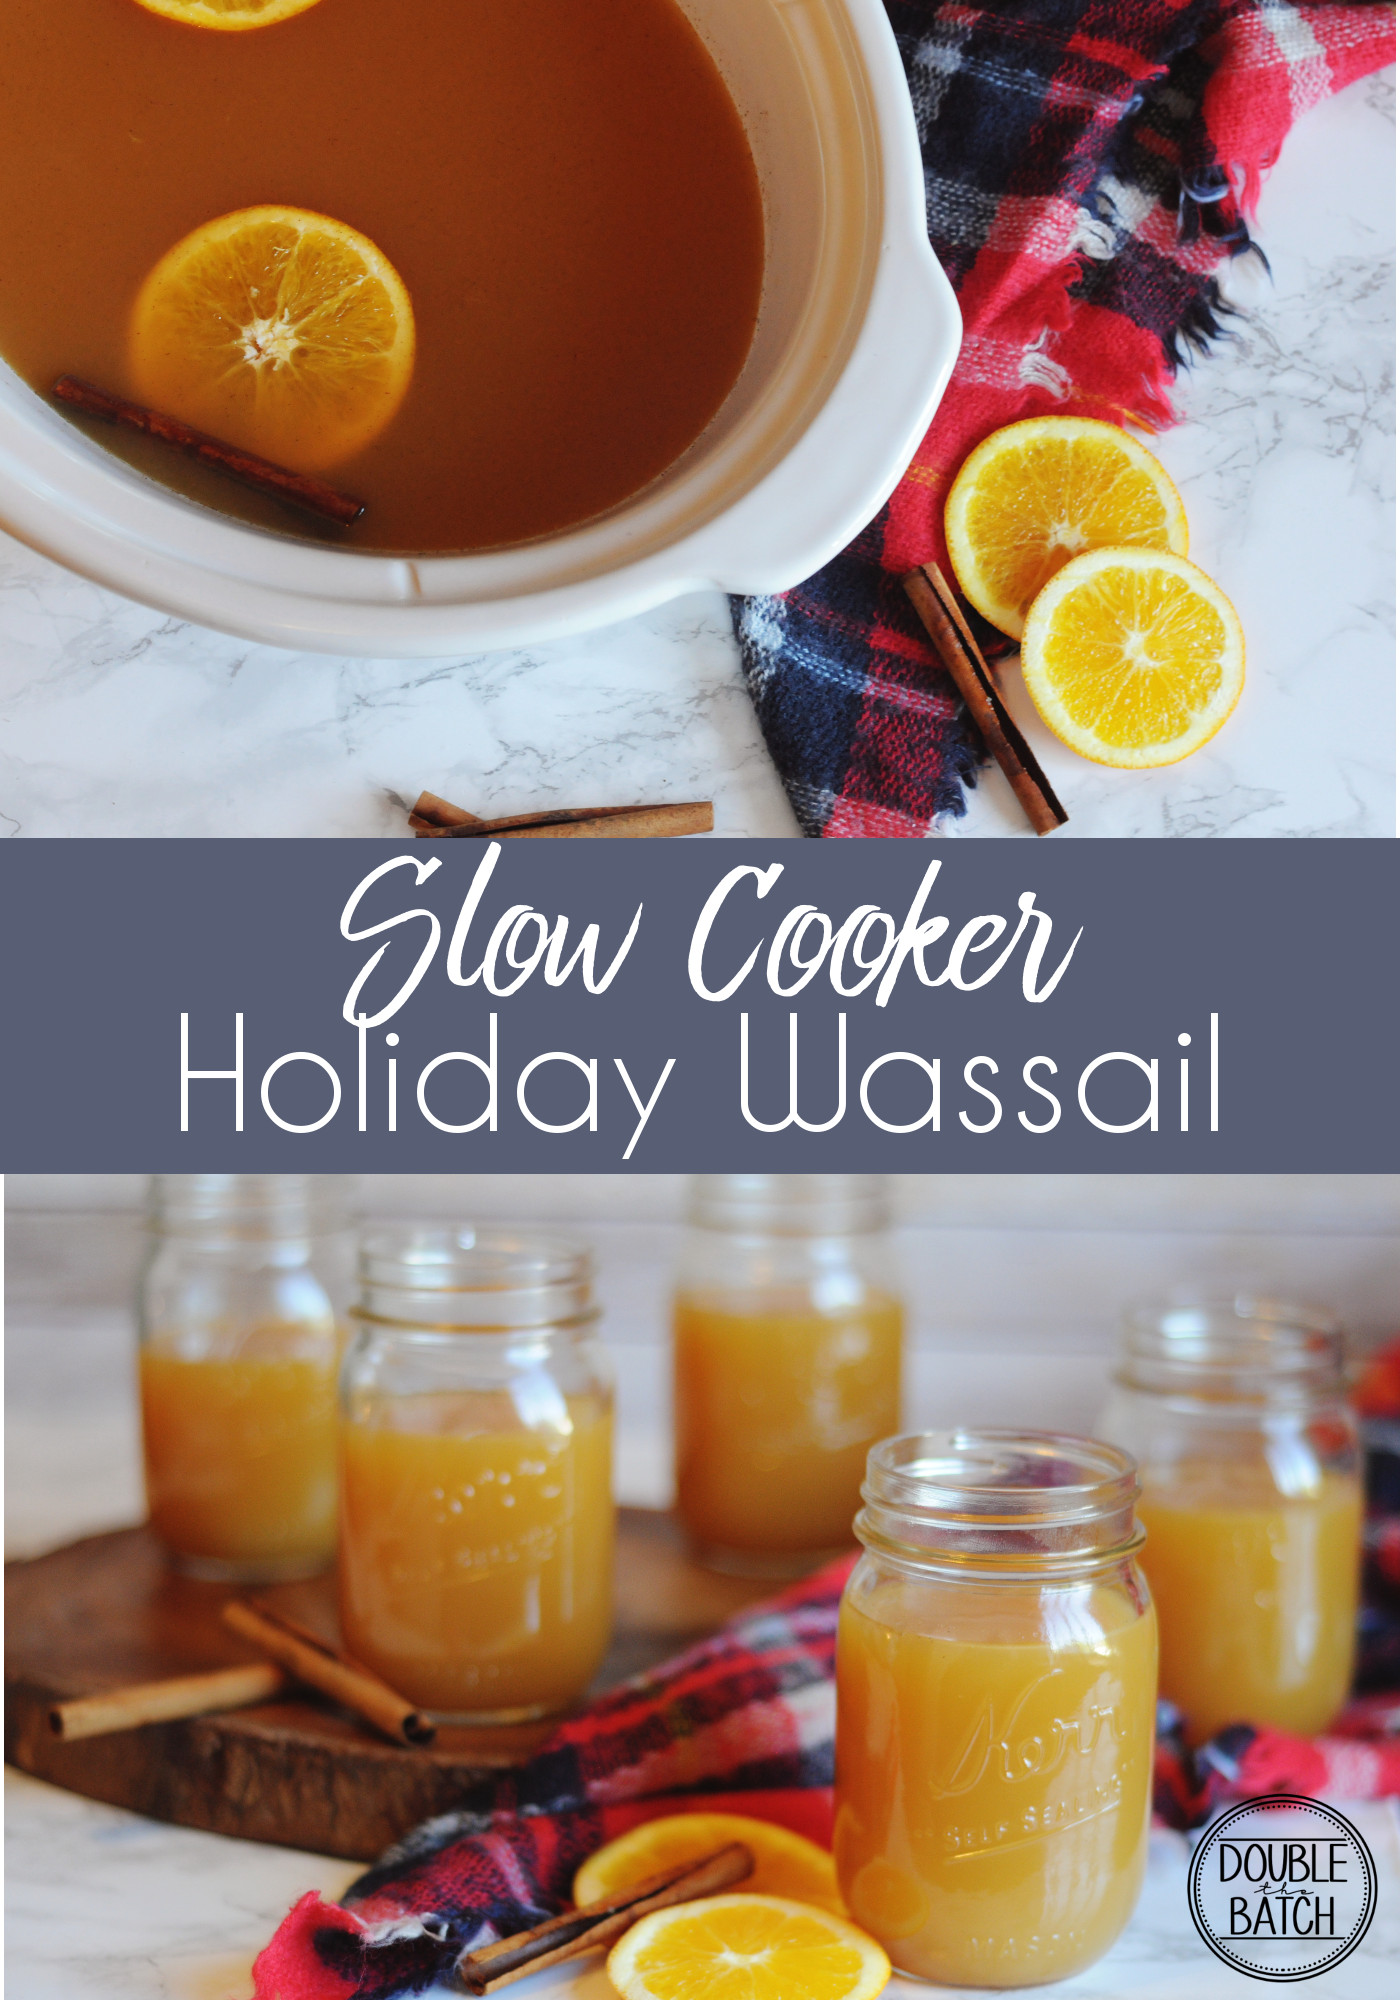 Easy slow cooker Holiday Wassail. Great for holiday parties or family gatherings.